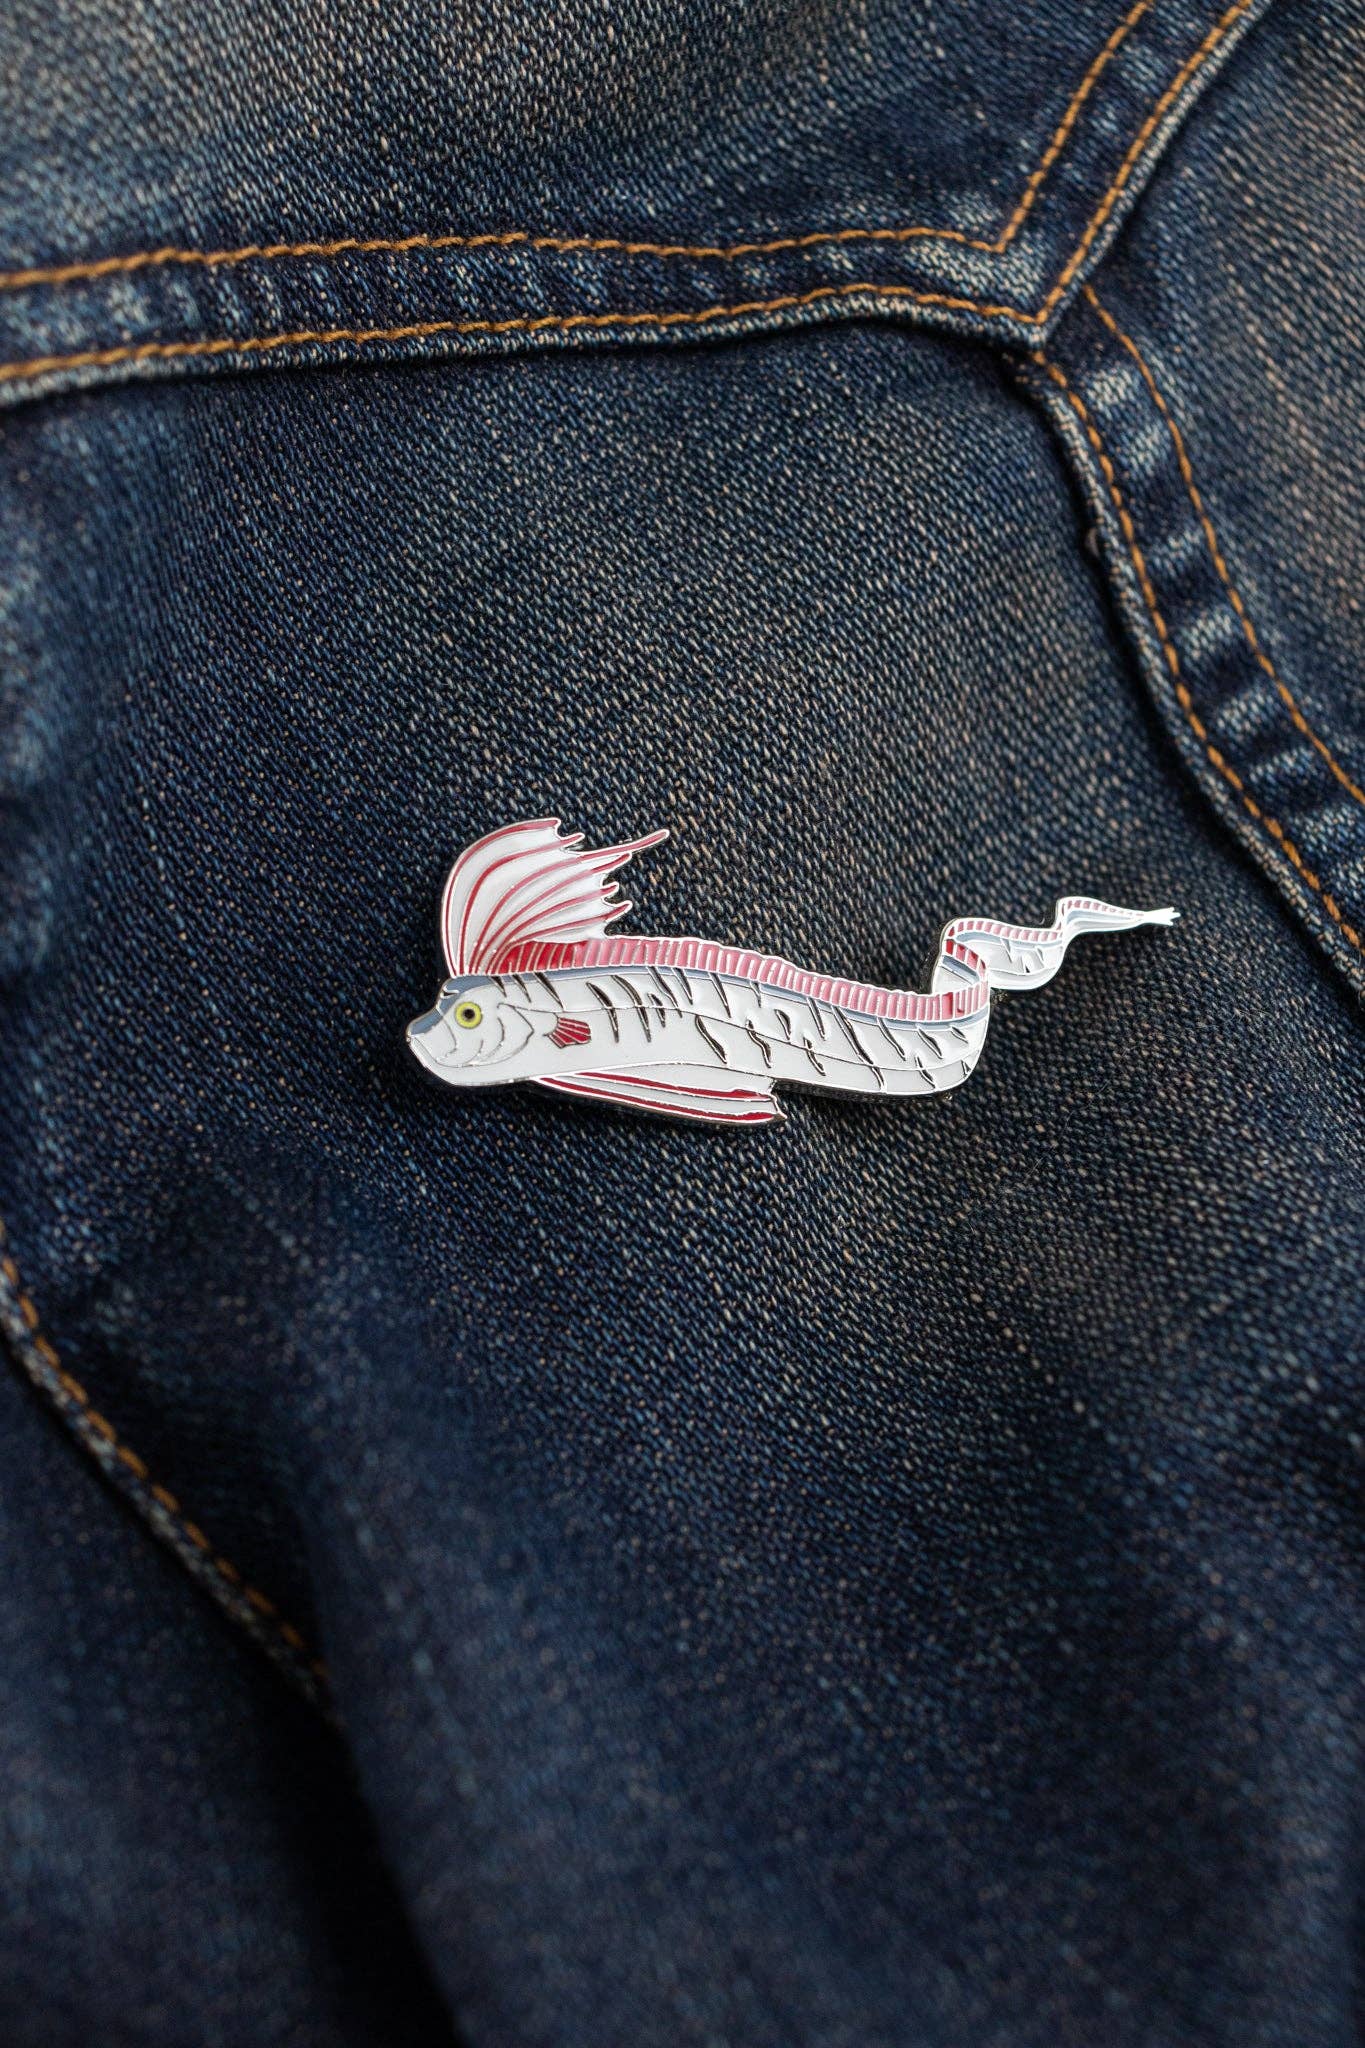 Regalecus Glesne (Giant Oarfish) Pin - Space Camp